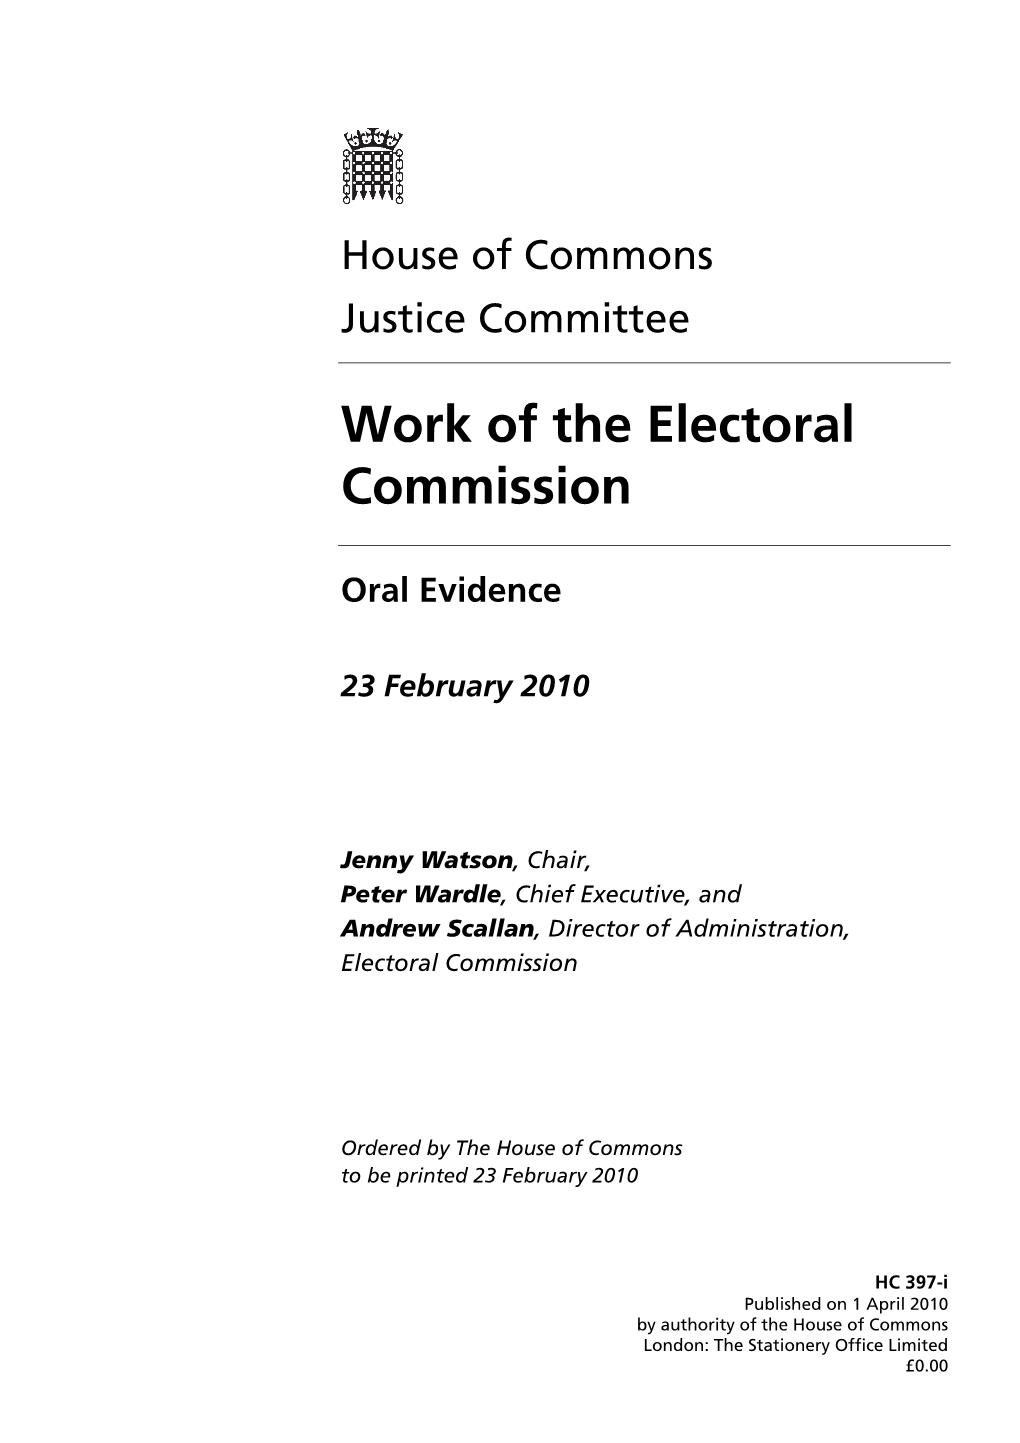 Work of the Electoral Commission